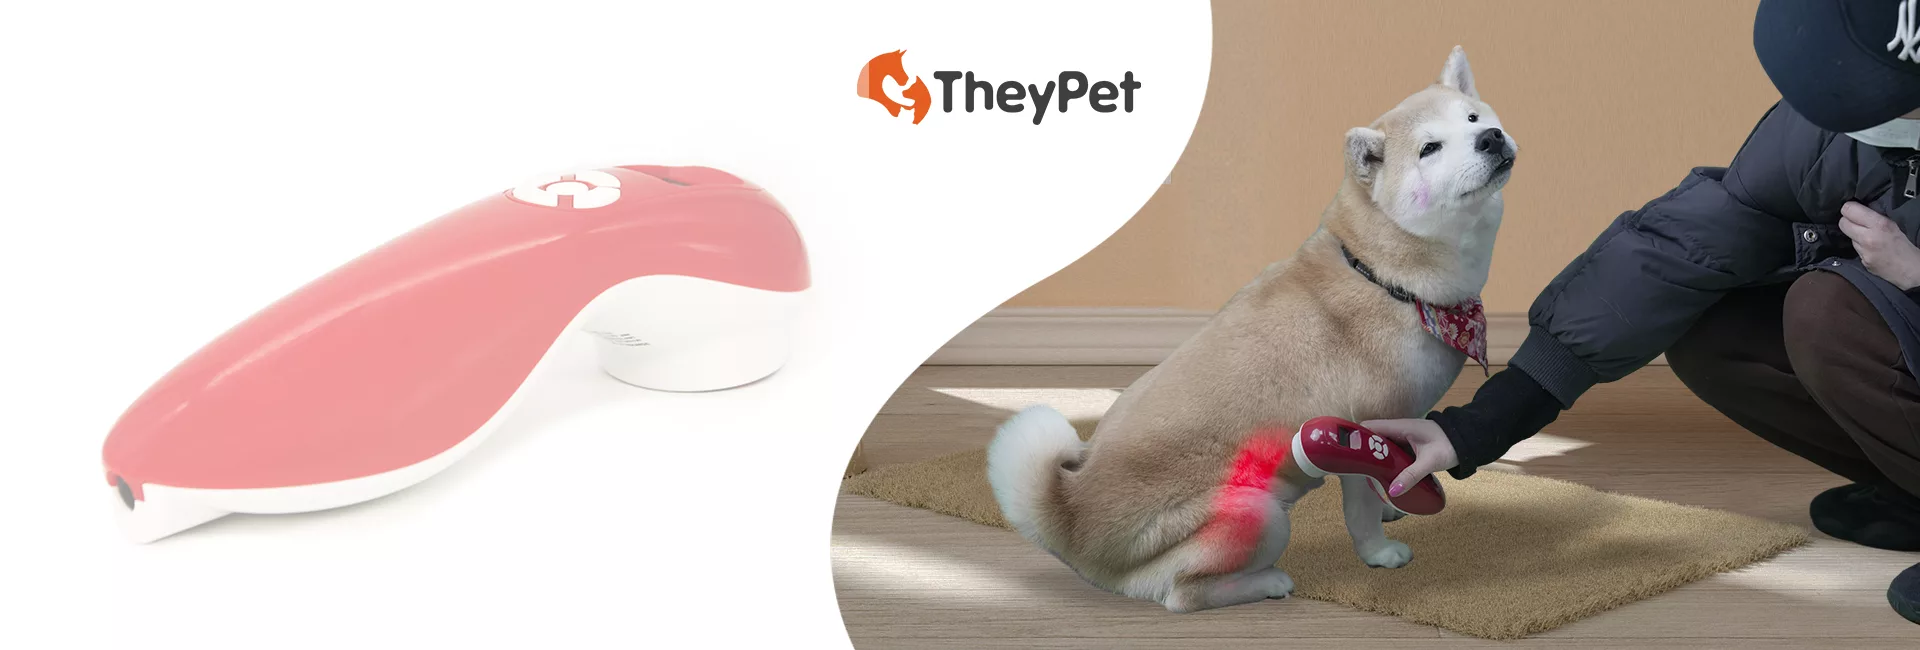 Veterinary Handheld Class Ⅲ Laser Therapy Device